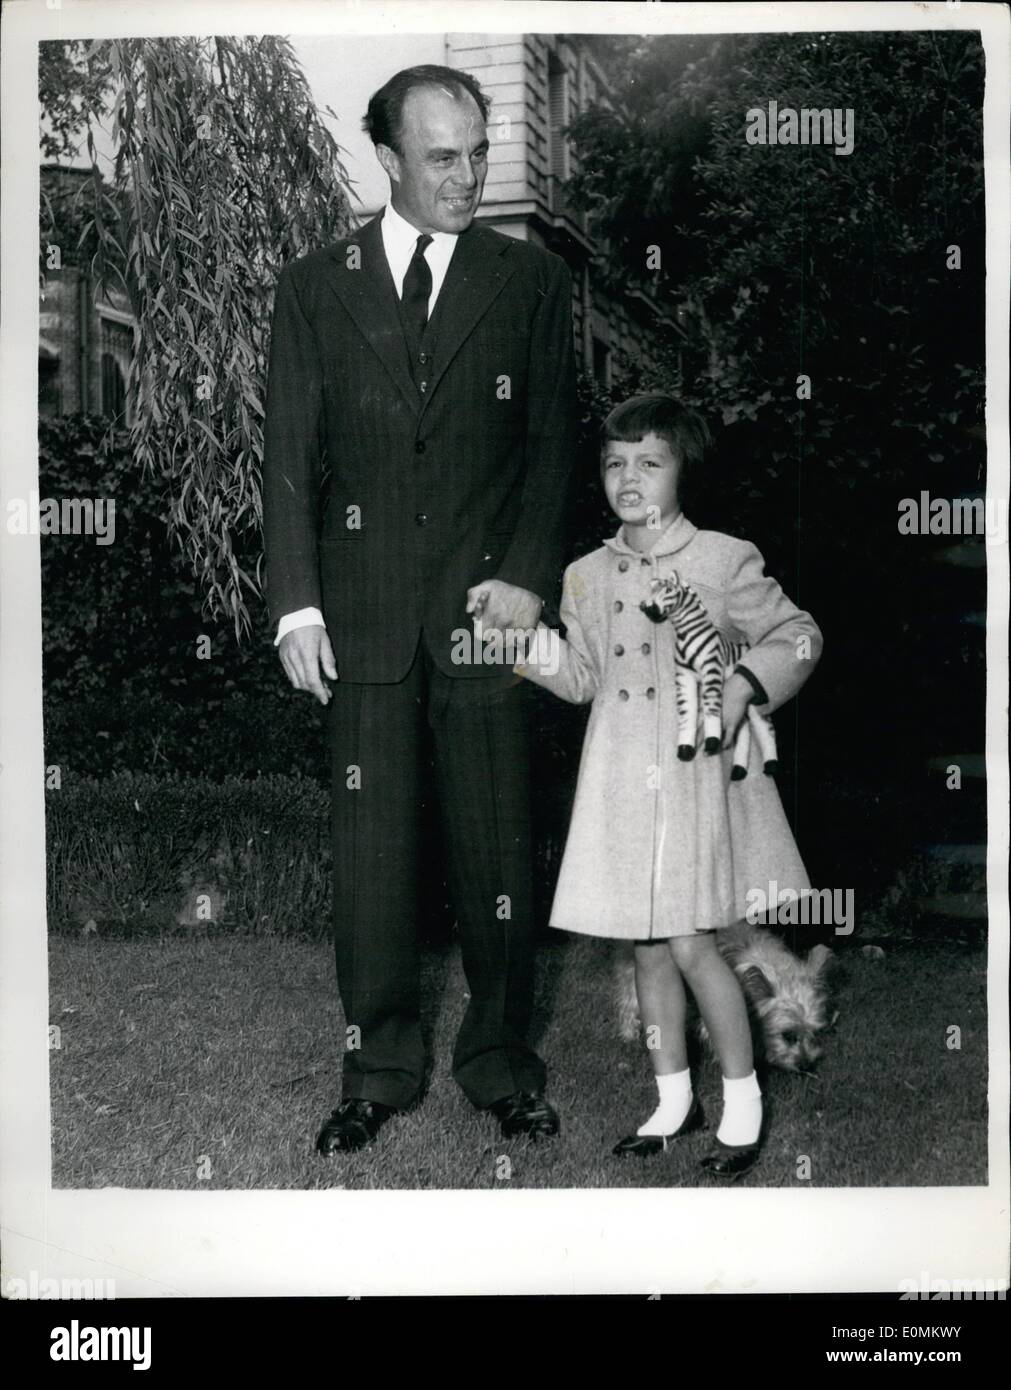 Oct. 10, 1955 - Prince Aly Khan and Daughter Yasmin.: Photo shows Prince Aly Khan, pictured with his little daughter Yasmin, in Stock Photo